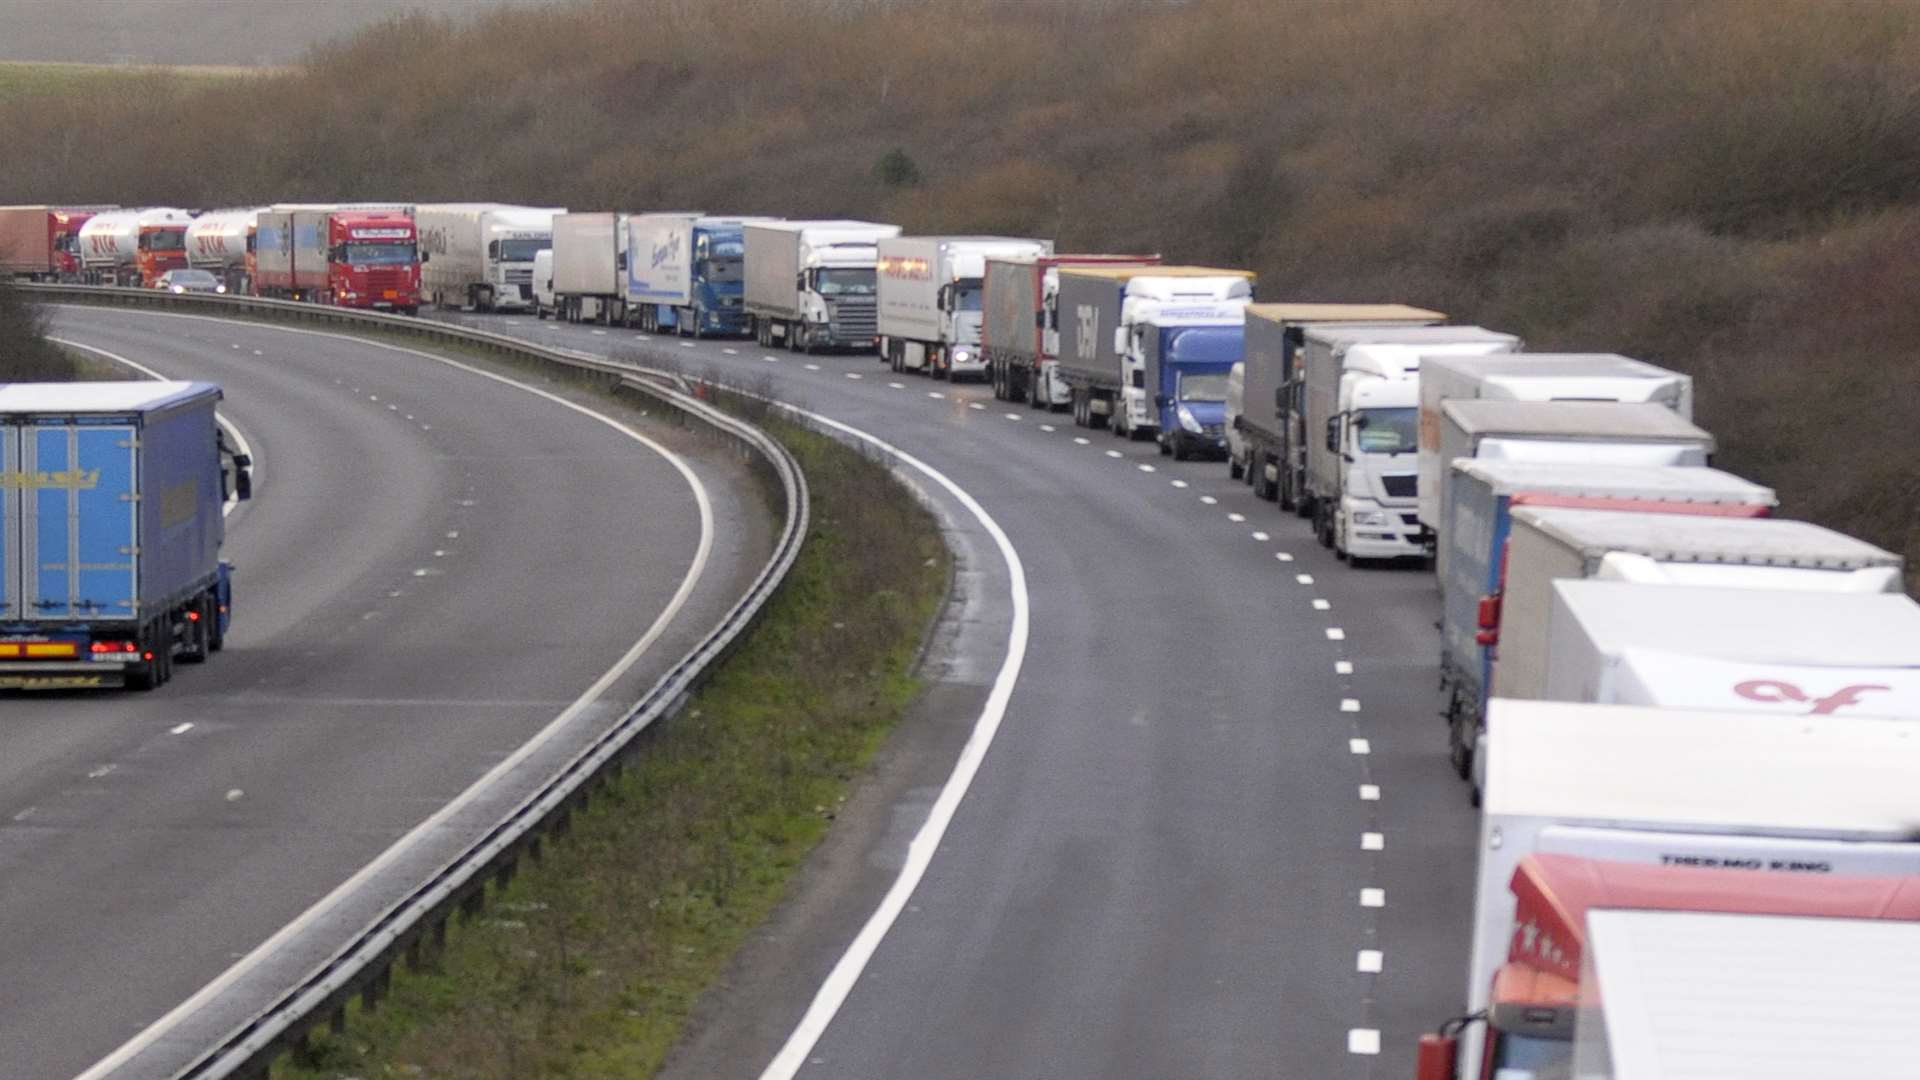 Lorries stacking on the A20 towards Dover.